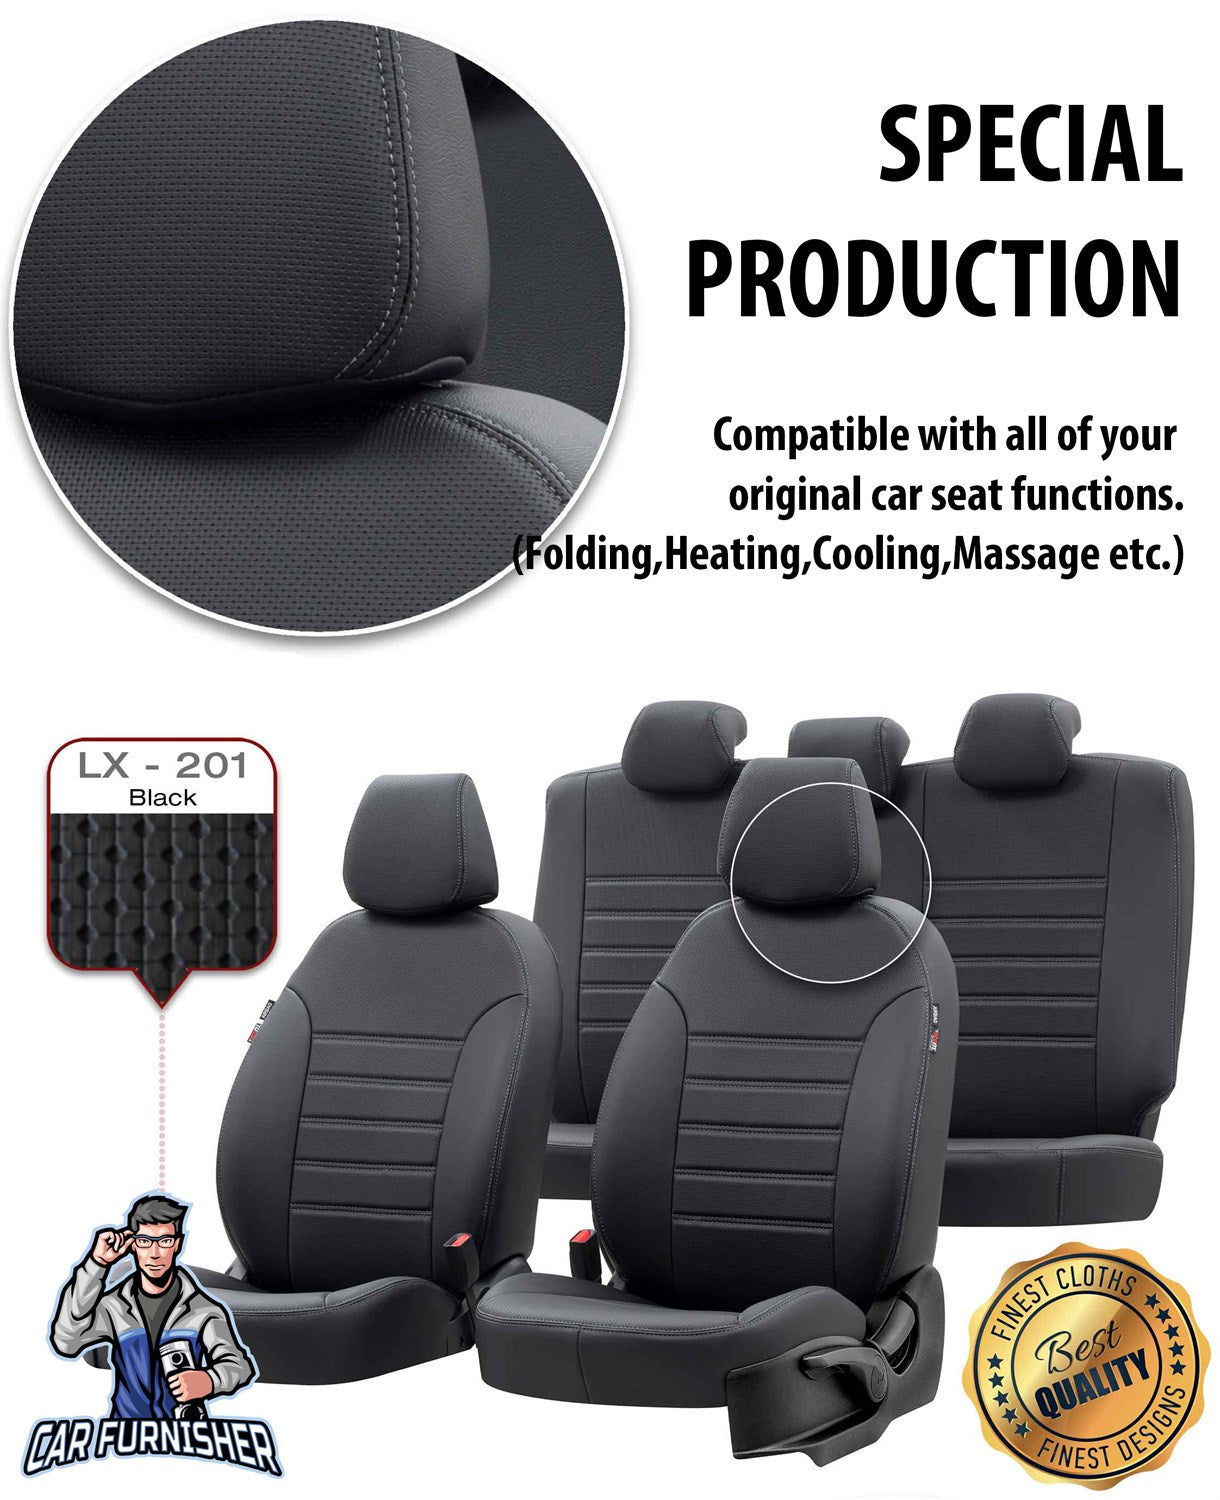 Geely Emgrand Seat Covers New York Leather Design Ivory Leather